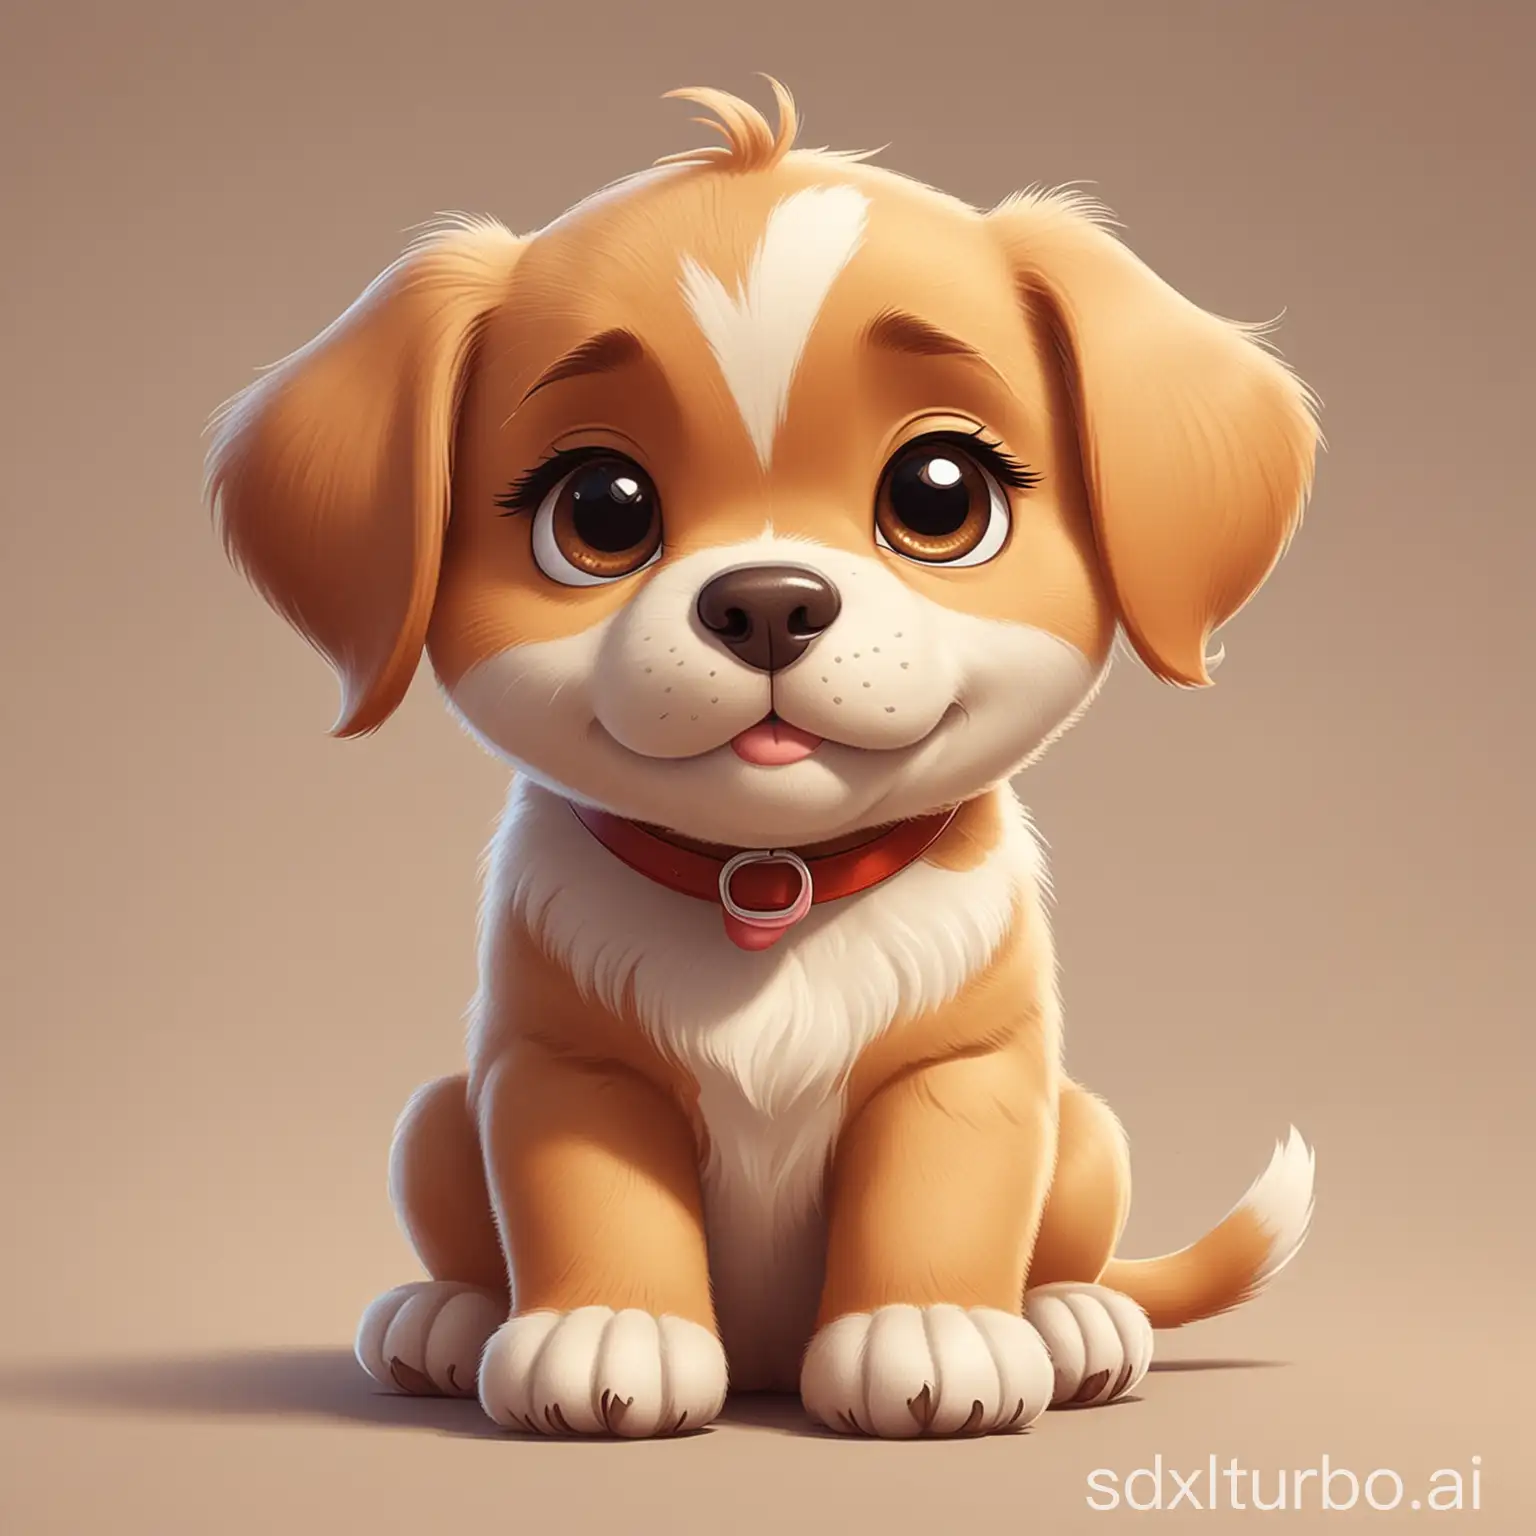 Adorable-Cartoon-Puppy-with-Playful-Expression